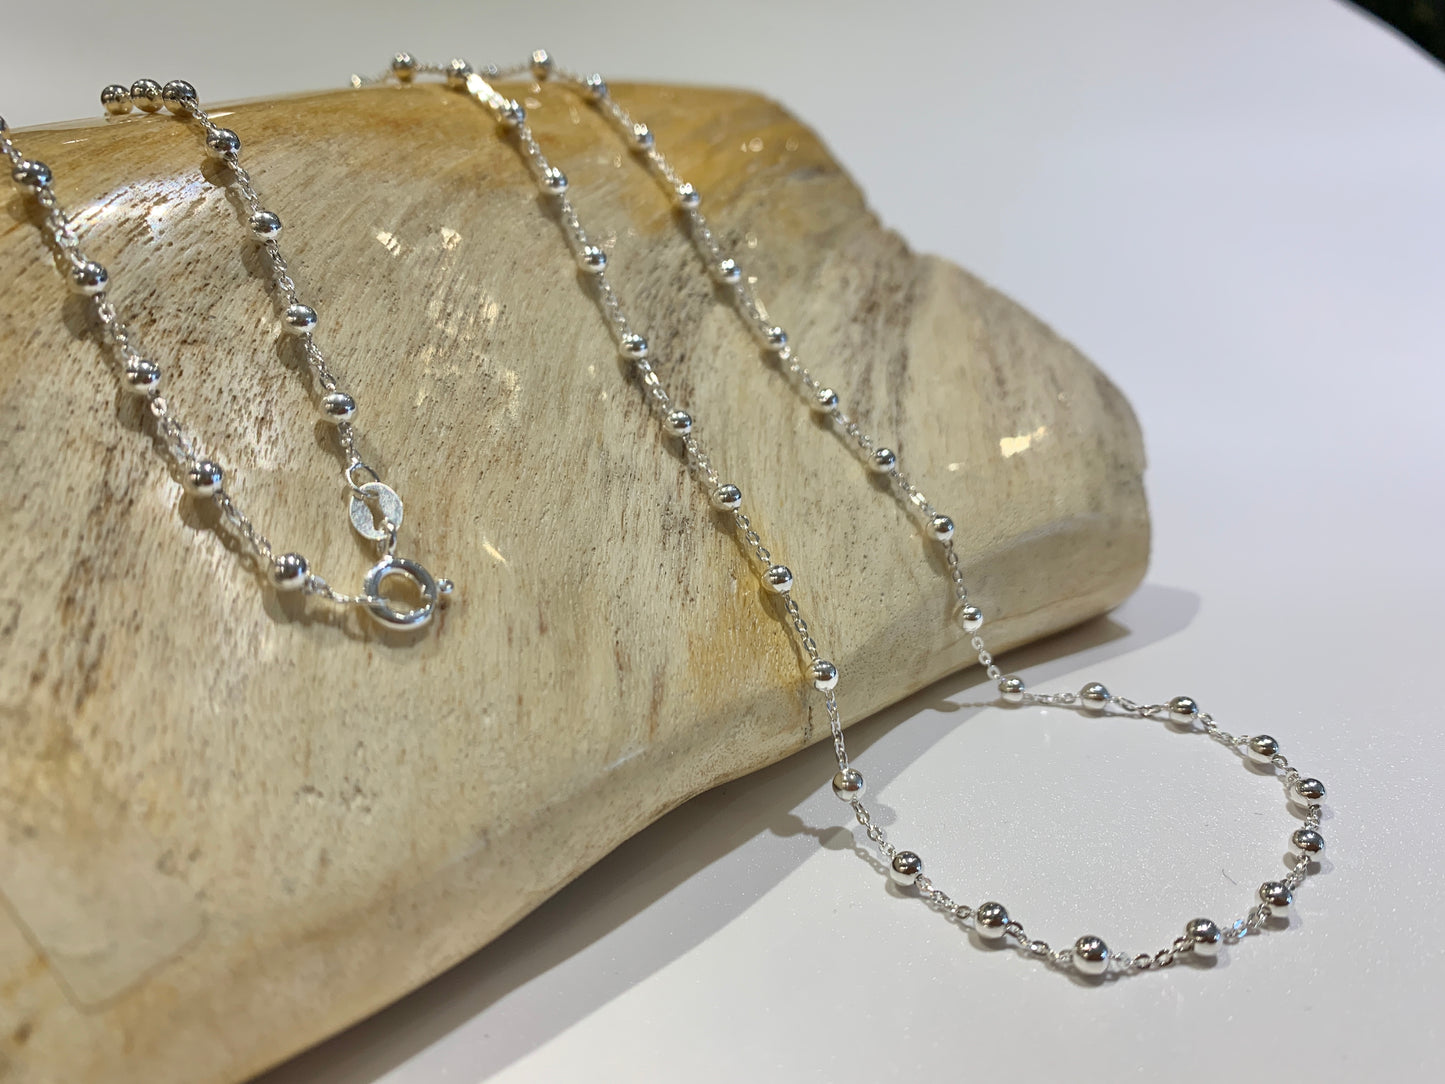 Silver Satellite Necklace - Chain link